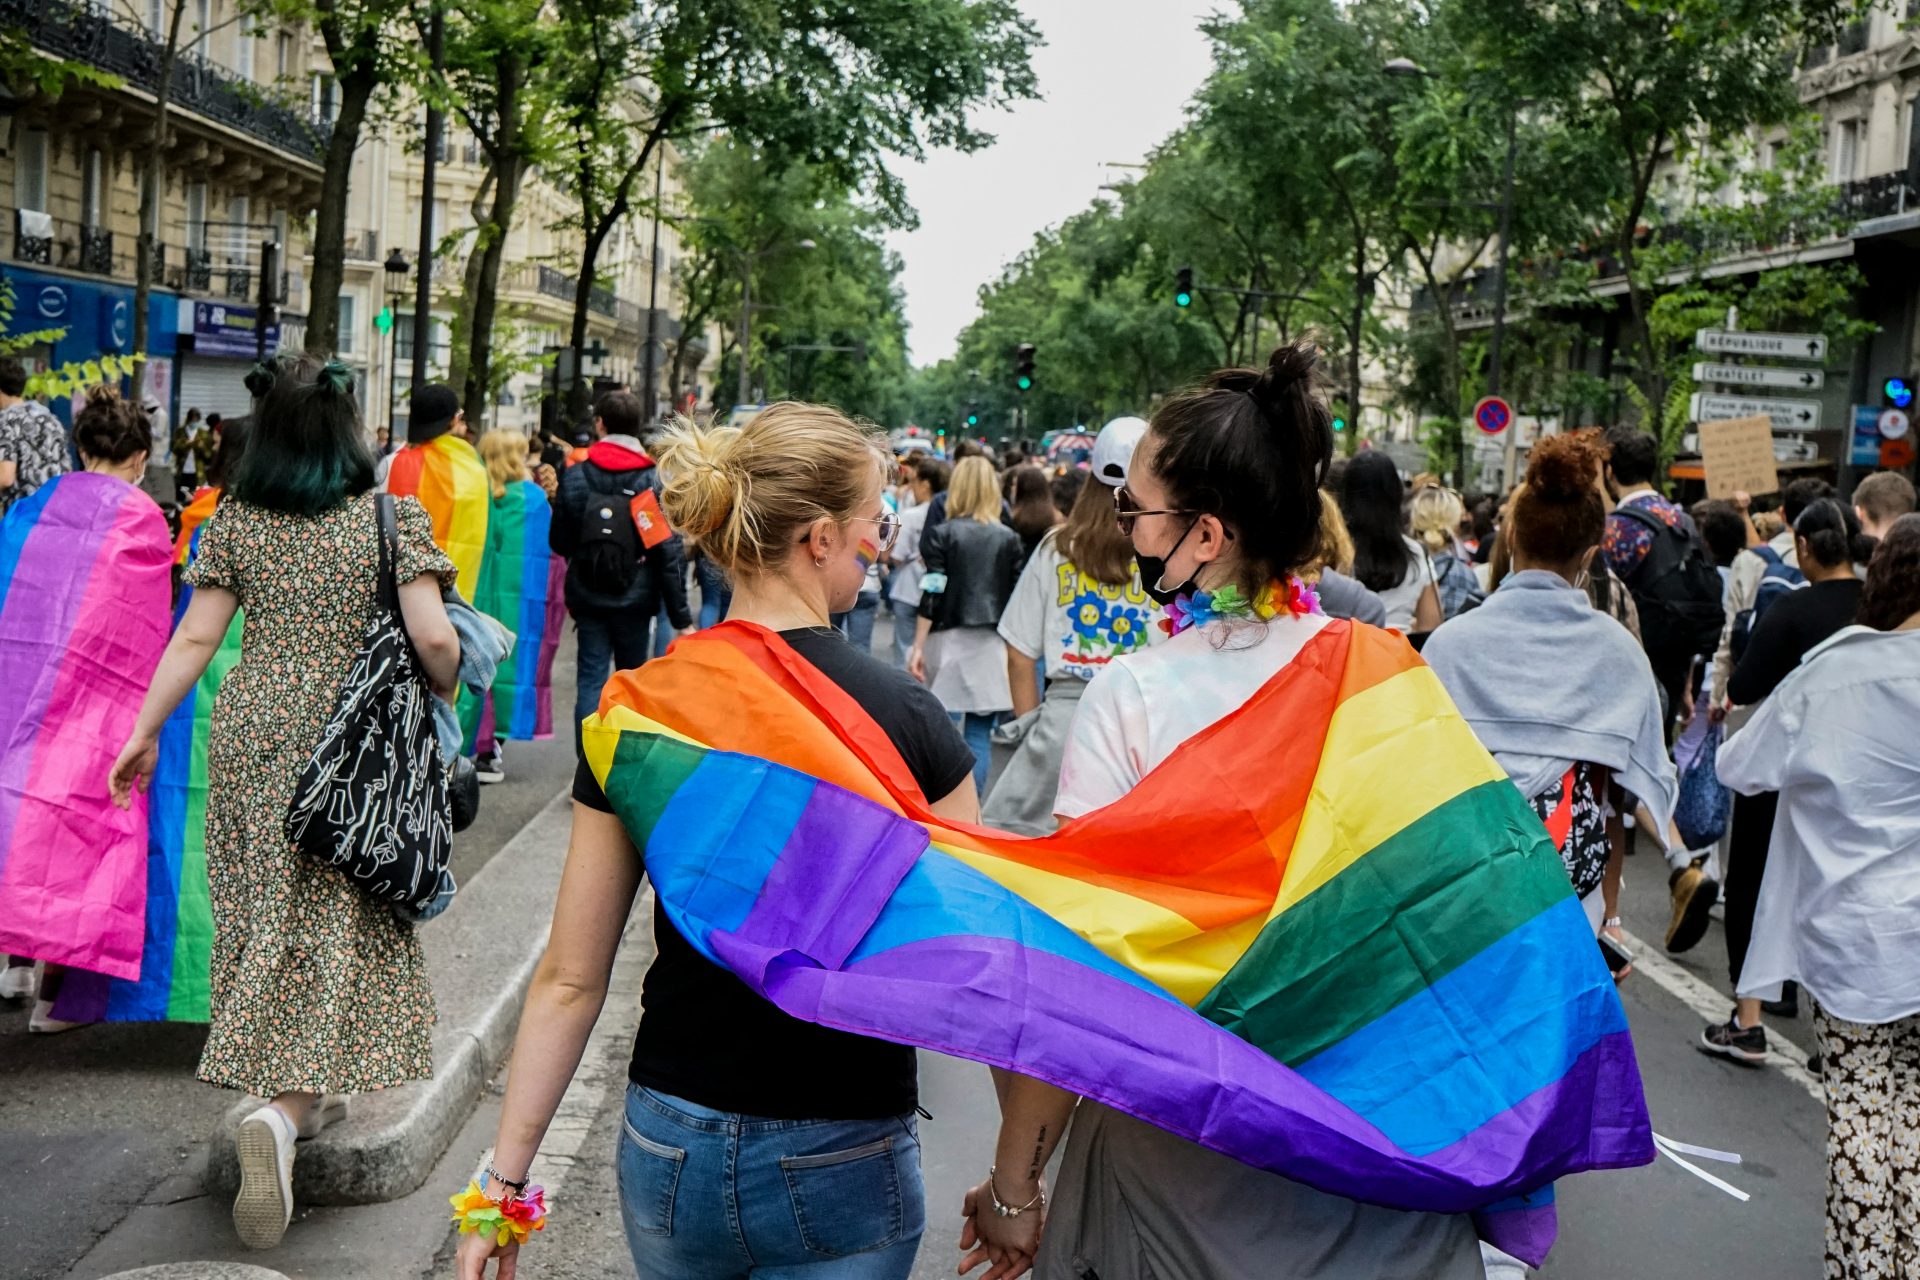 <p>Over the years, the LGBTQ+ demonstrations and celebrations in cities such as San Francisco, Madrid, Berlin, and London (among many other places) have mostly been events for enjoyment. They rarely involved violent acts.</p> <p>Image: Norbu Gyachung / Unsplash</p>